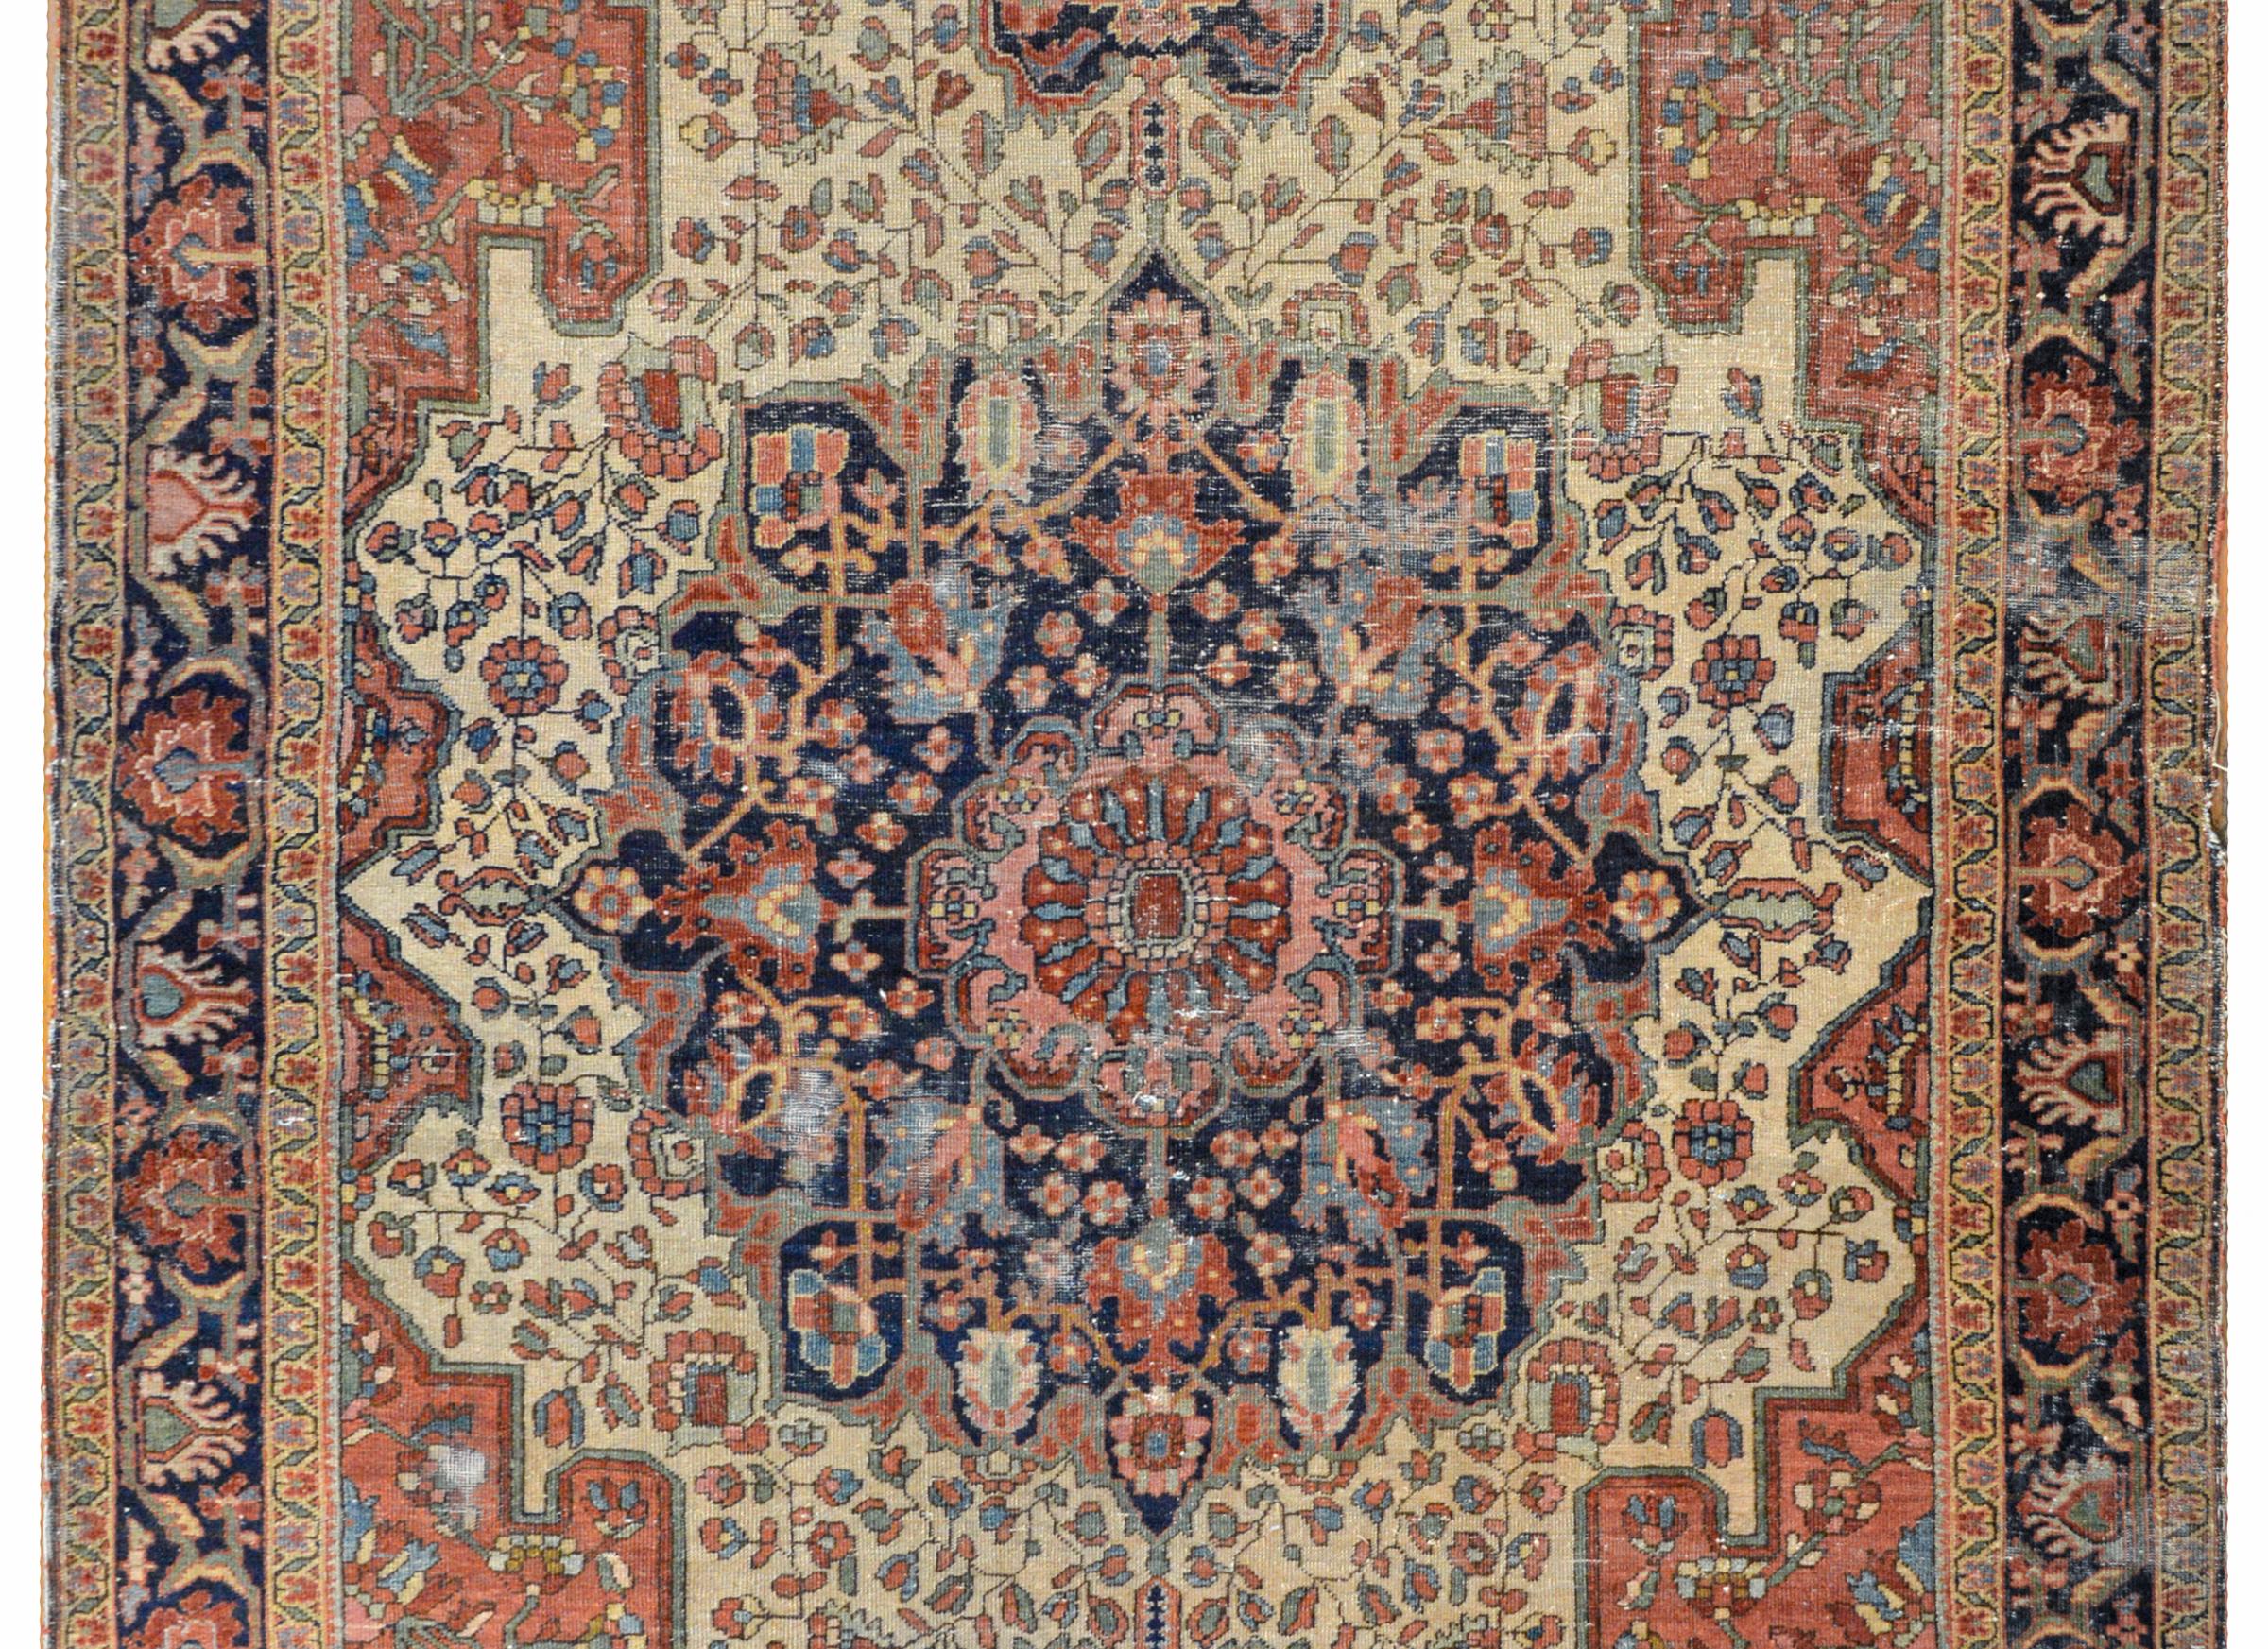 An amazing early 20th century Persian Sarouk Farahan rug with a large central medallion composed of multiple flowers woven in crimson, light and dark indigo, brown and cream colored wool on a dark indigo background, all amidst another field of